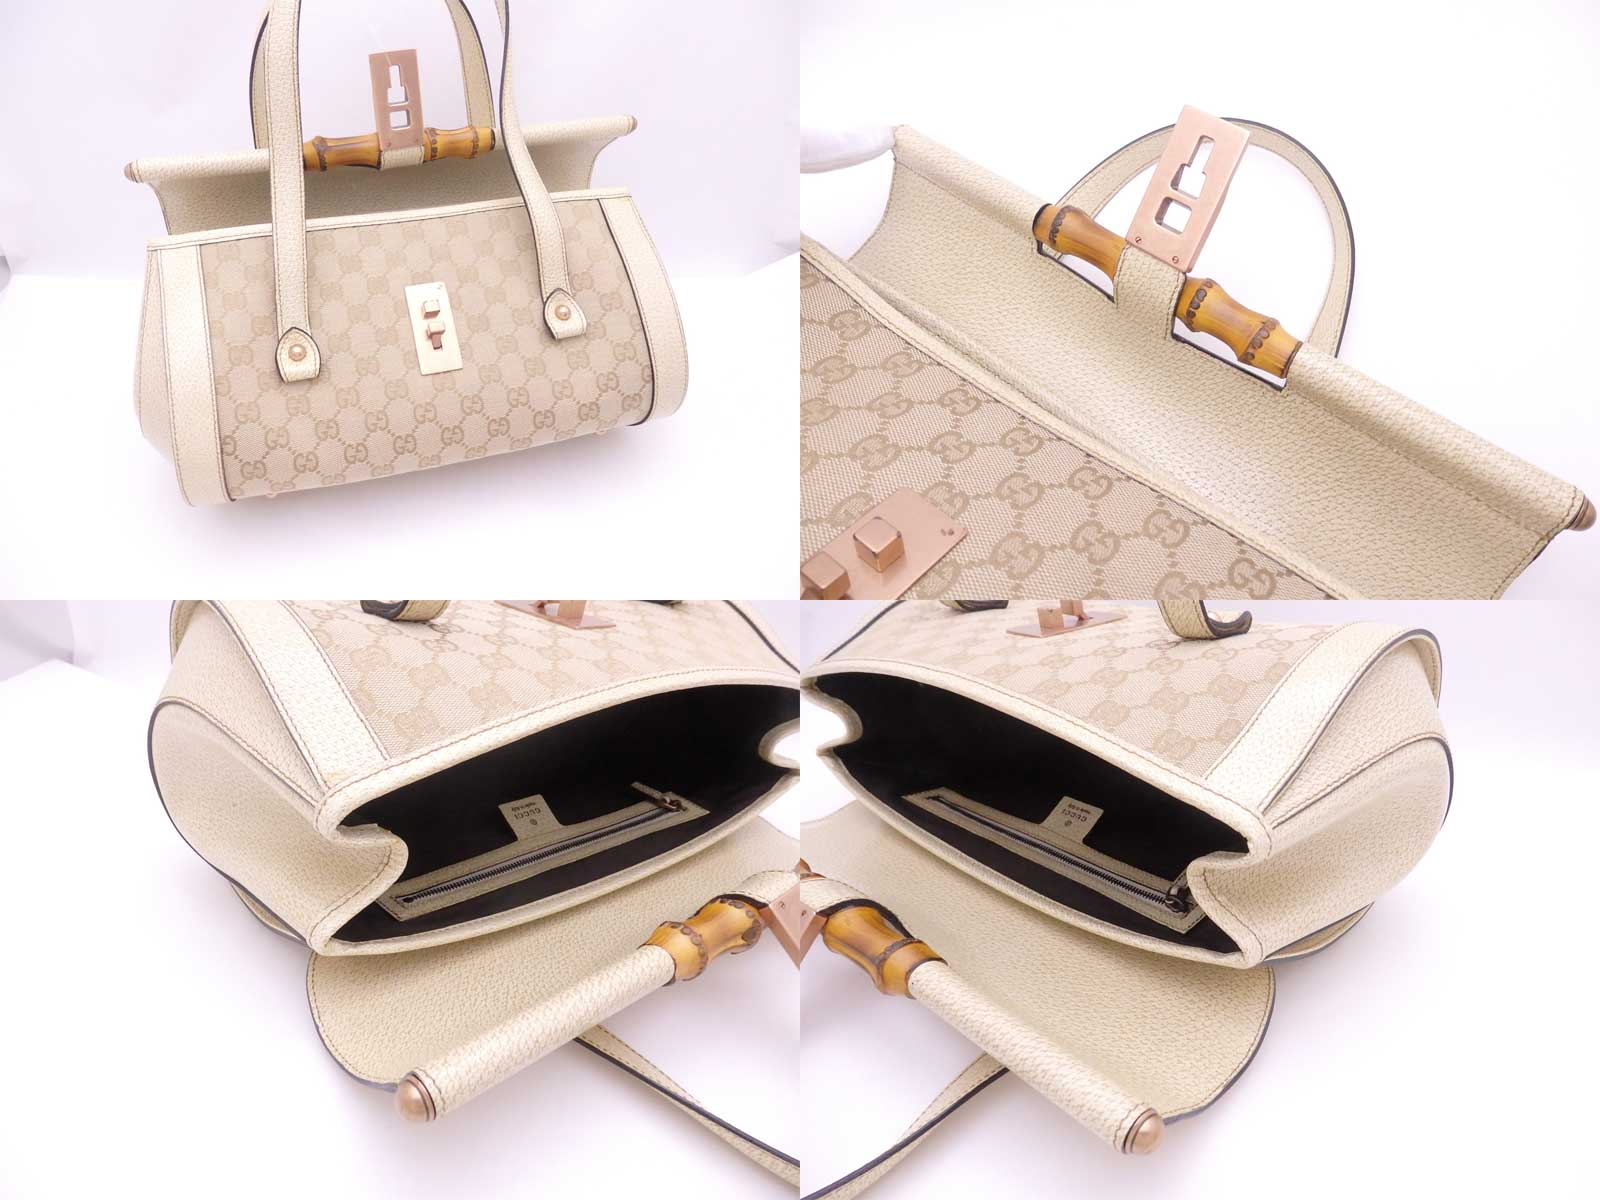 Auth Gucci Gg Canvas Bamboo Shoulder Bag Beige Canvas Leather E43745 Ebay